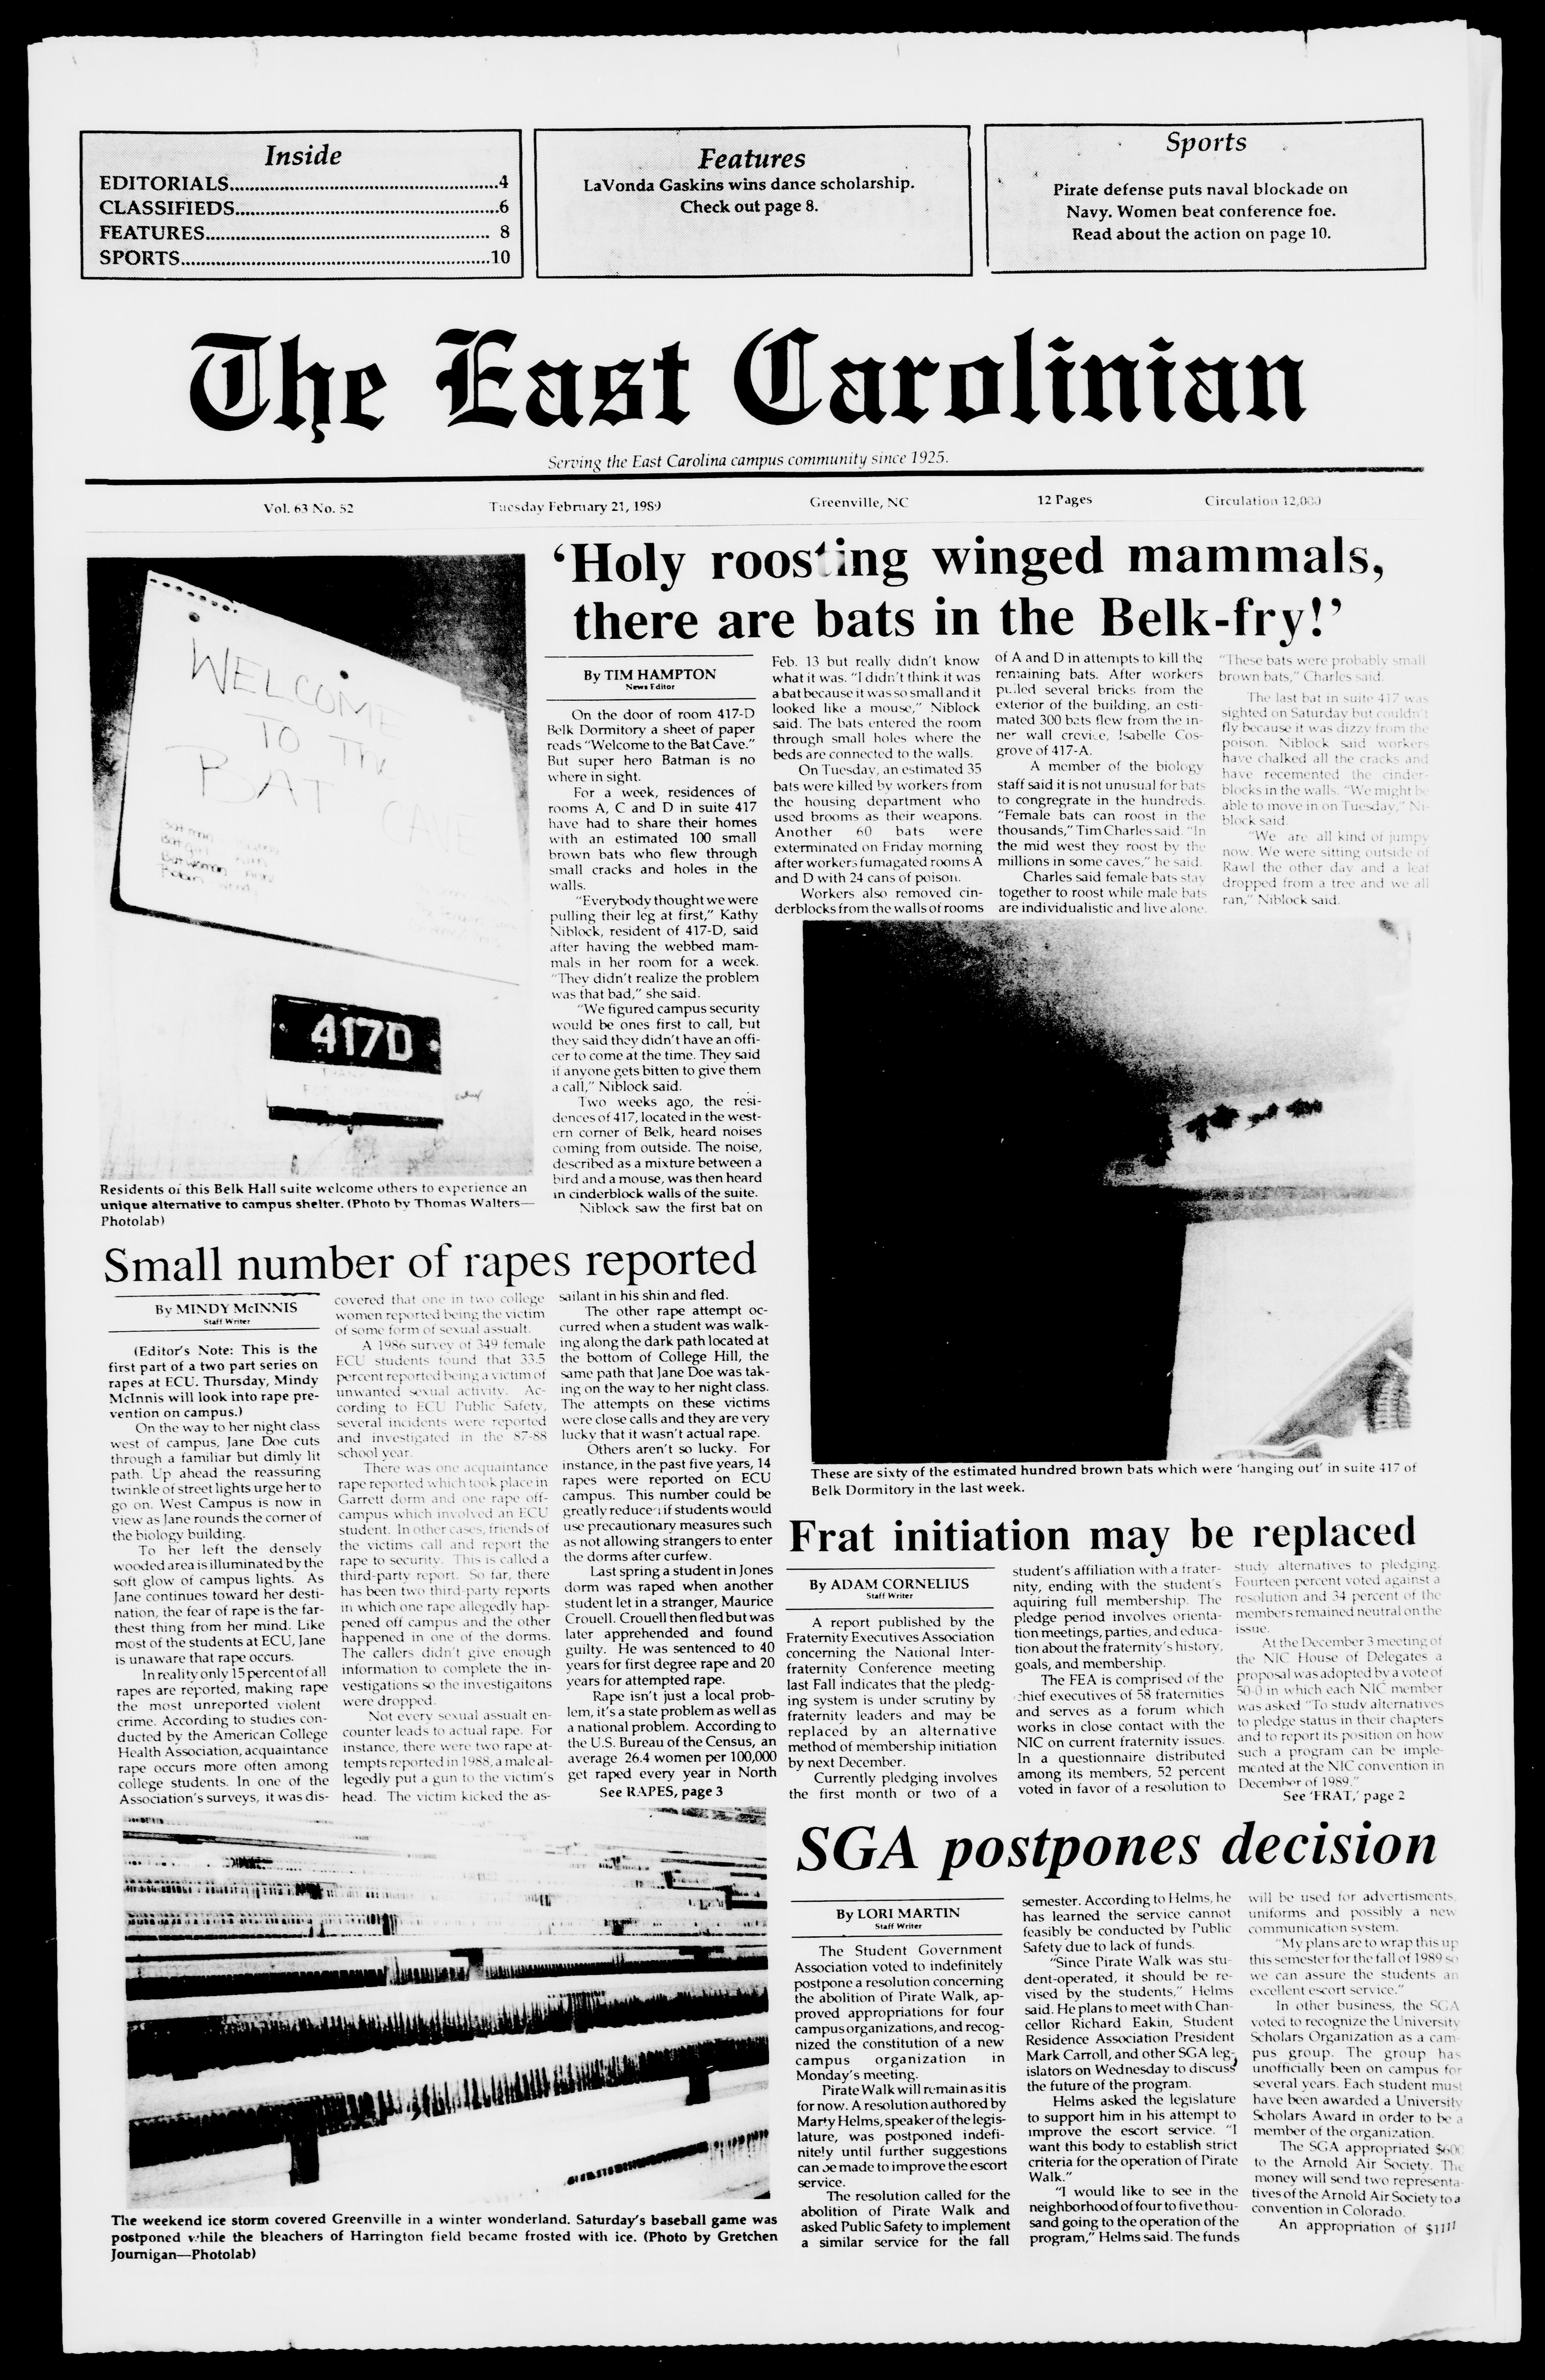 The East Carolinian, February 21, 1989 picture